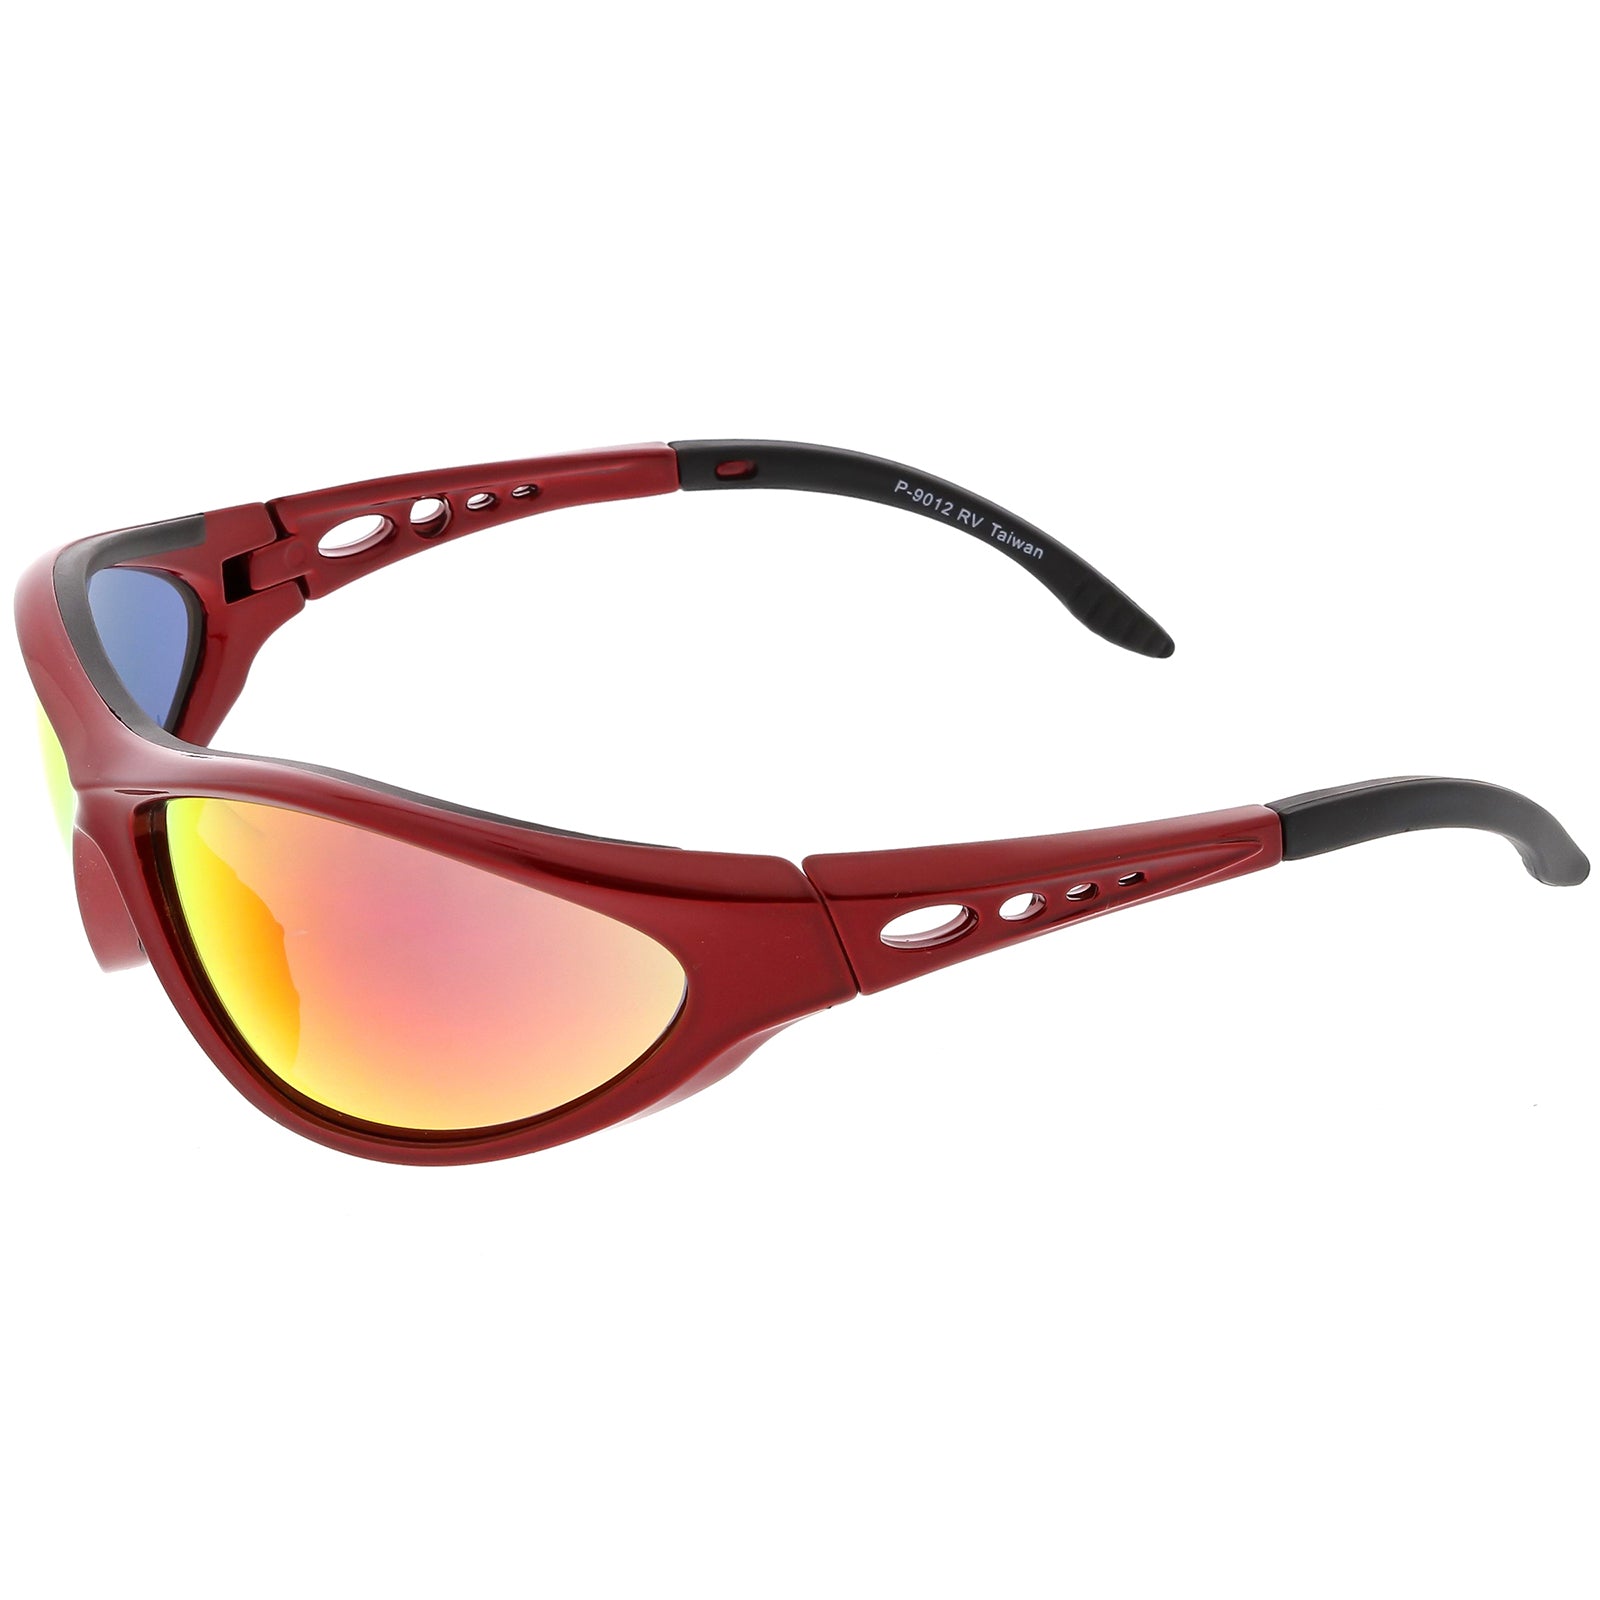 Sports TR-90 Wrap Sunglasses Ventilated Slim Arms Colored Mirror Lens 68mm